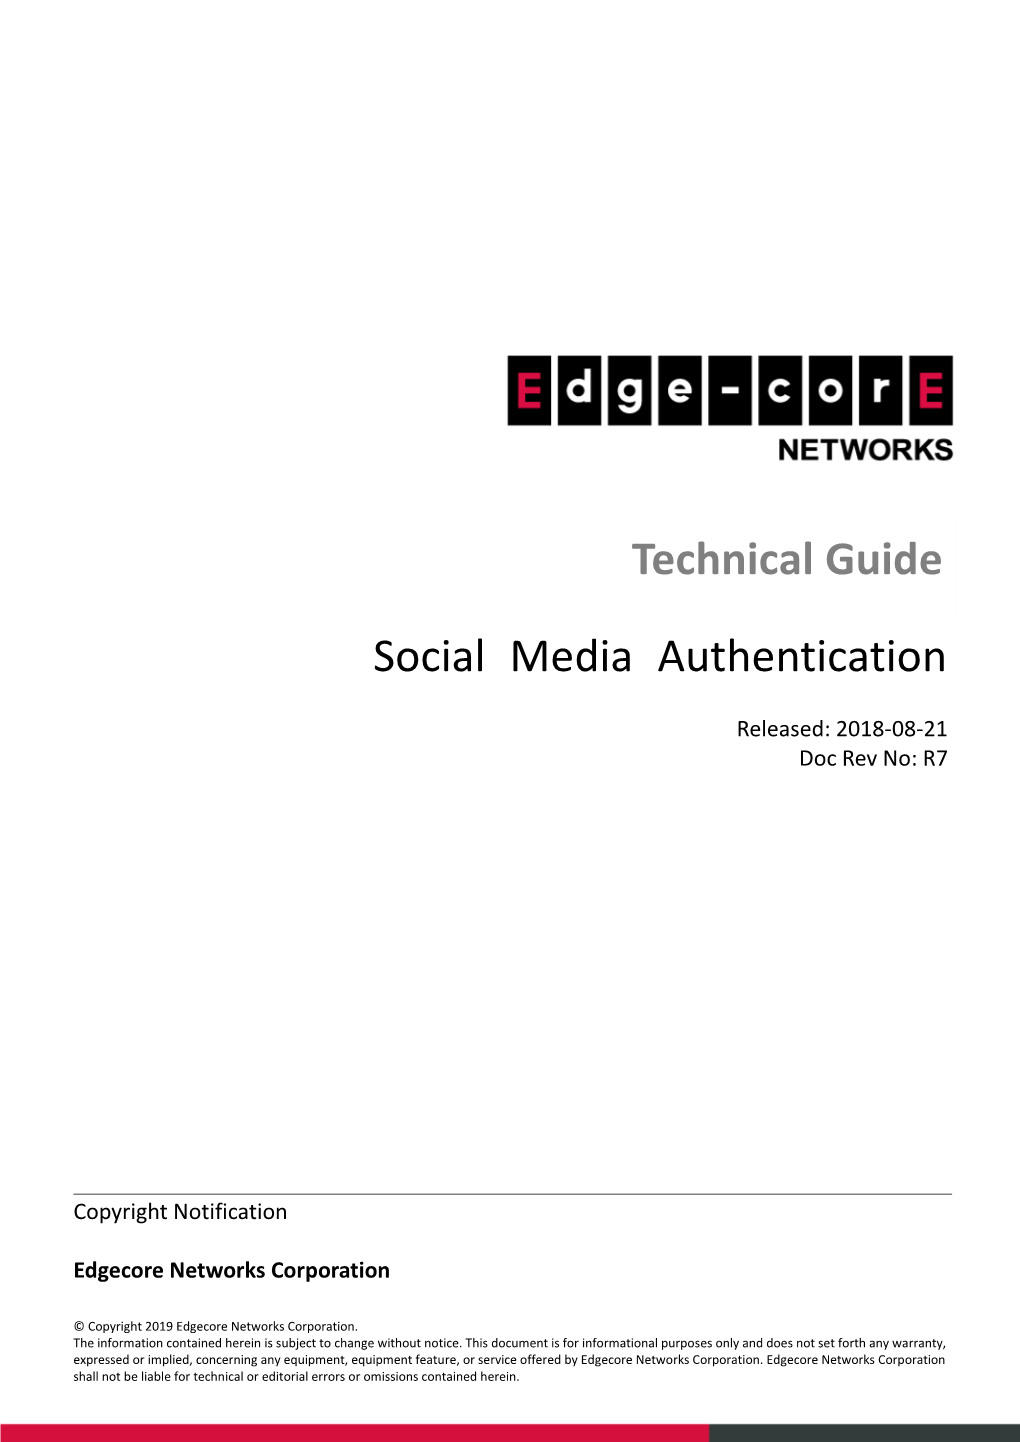 Social Media Authentication Technical Guide